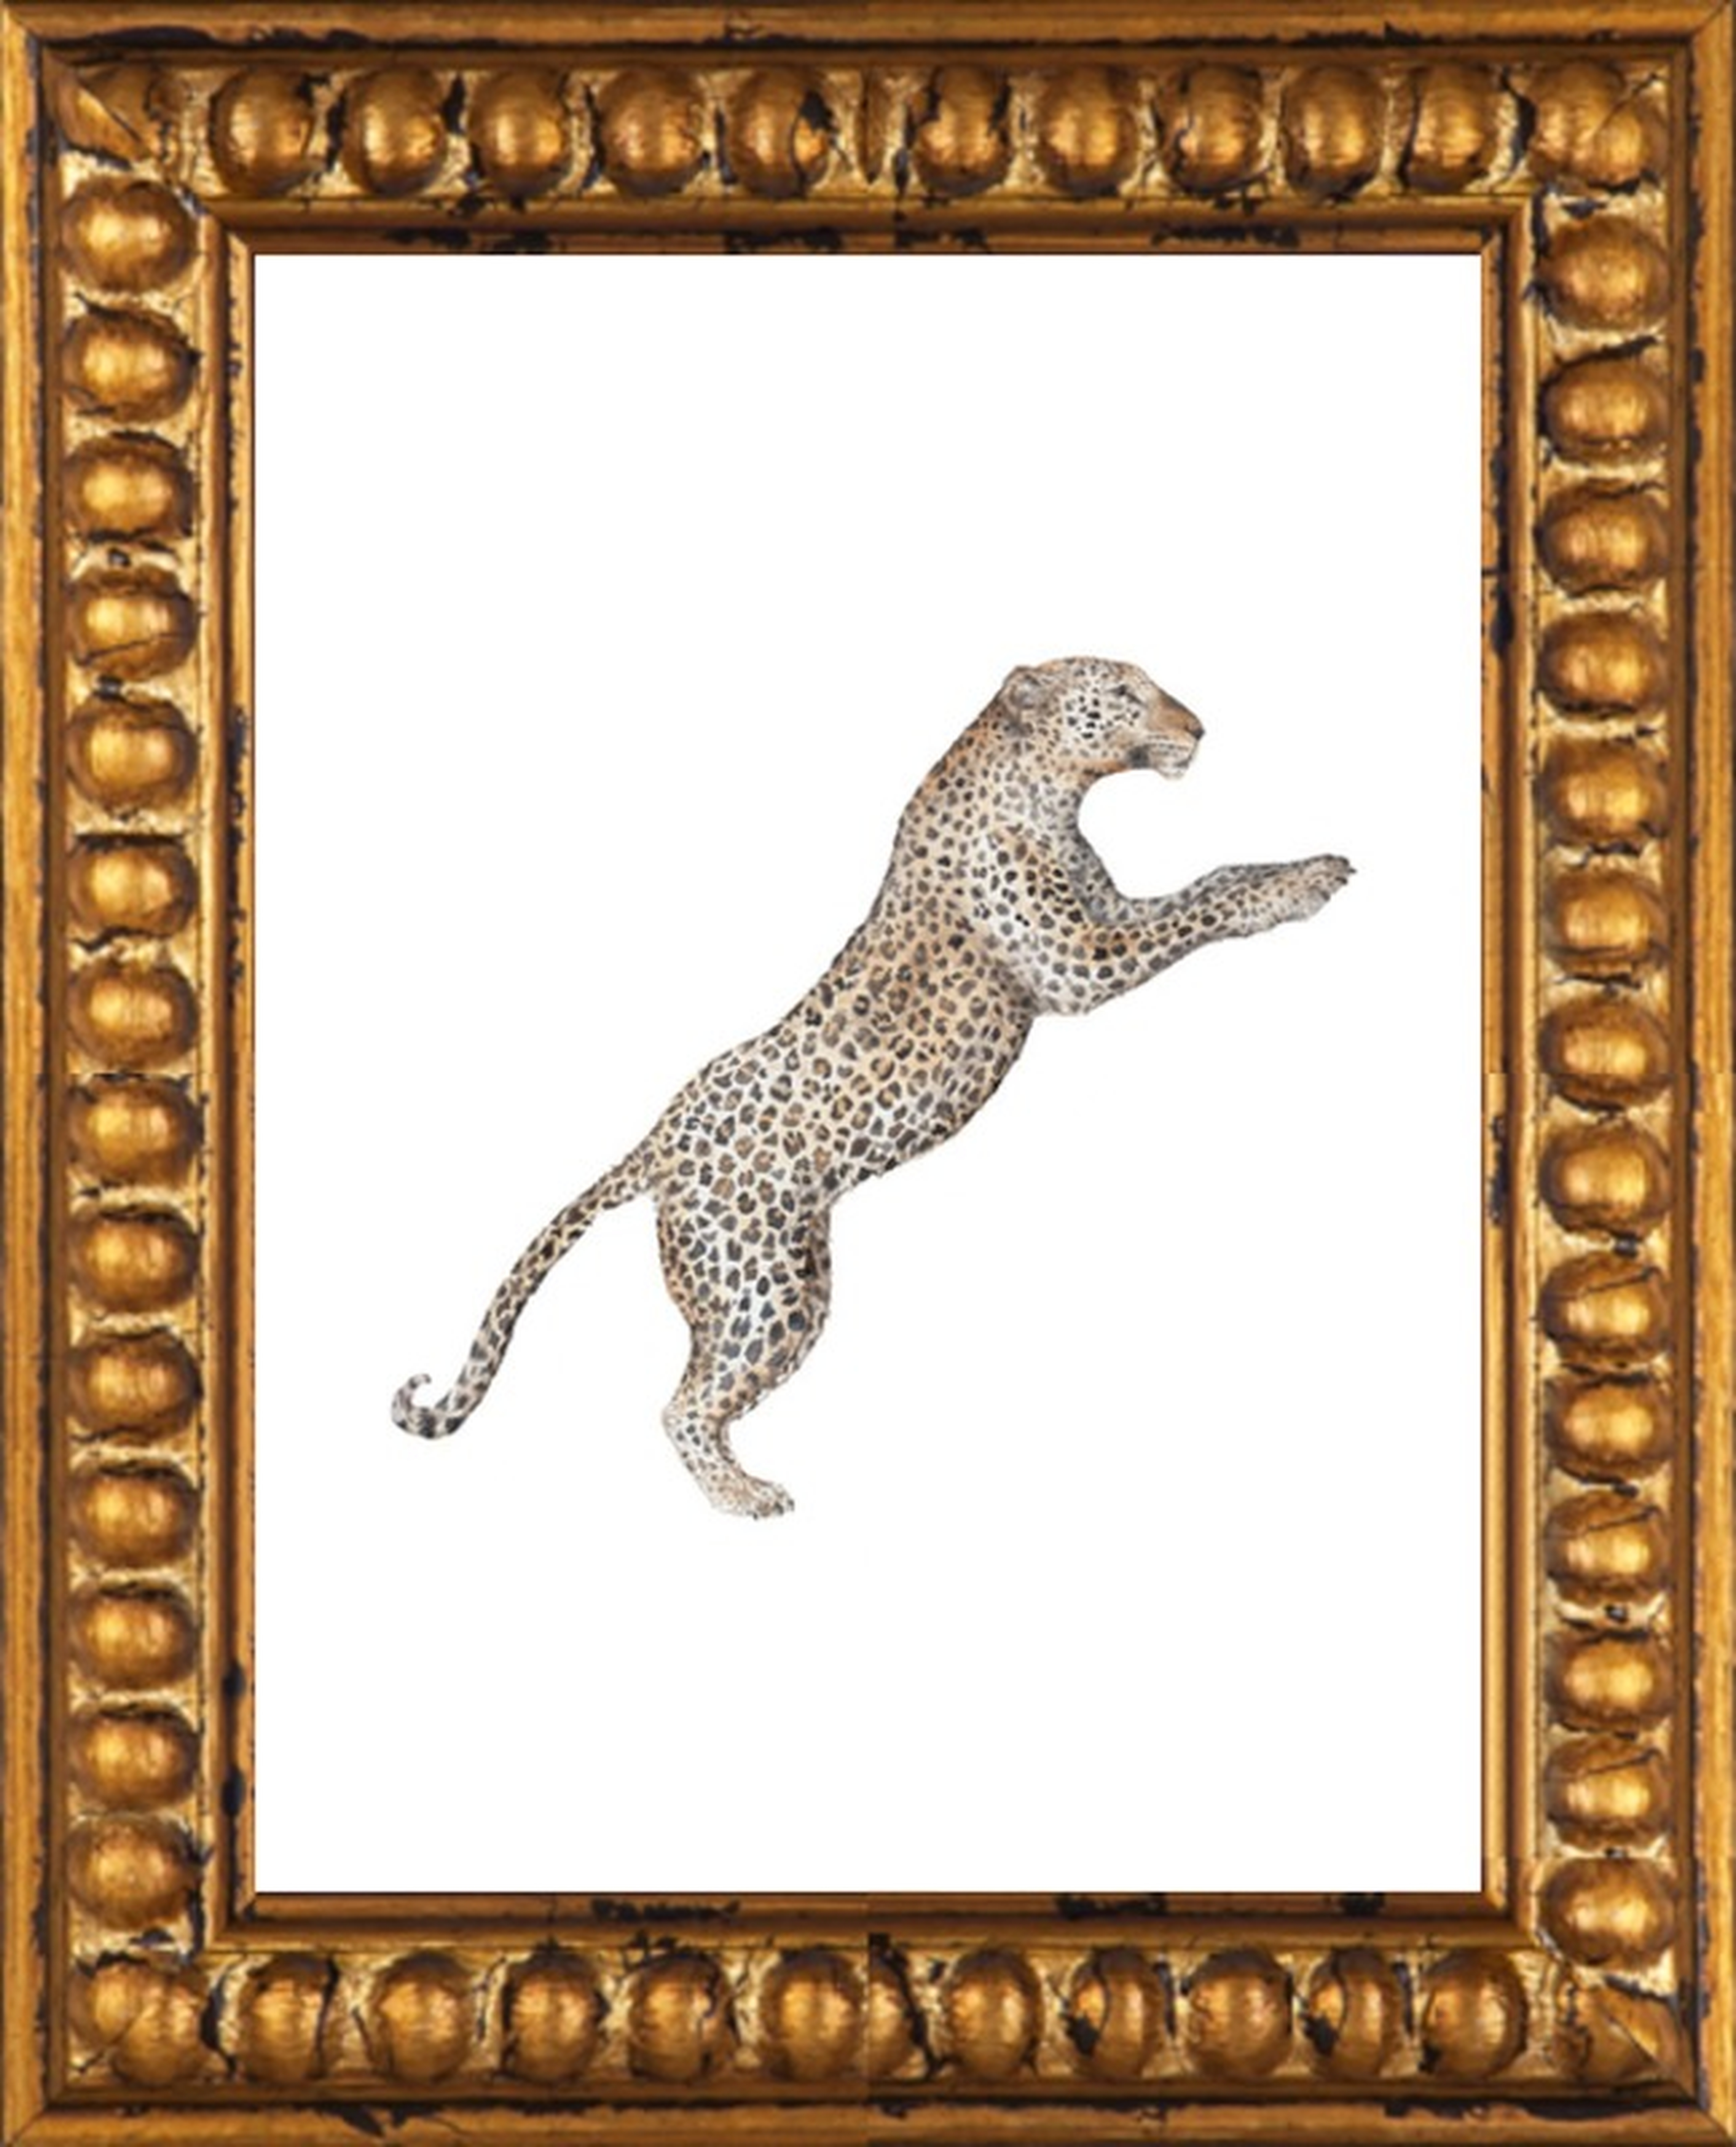 Leaping Leopard Watercolor by Lauren Rogoff for Artfully Walls - Gold Crackle Bead Wood Frame, No Matte - Artfully Walls